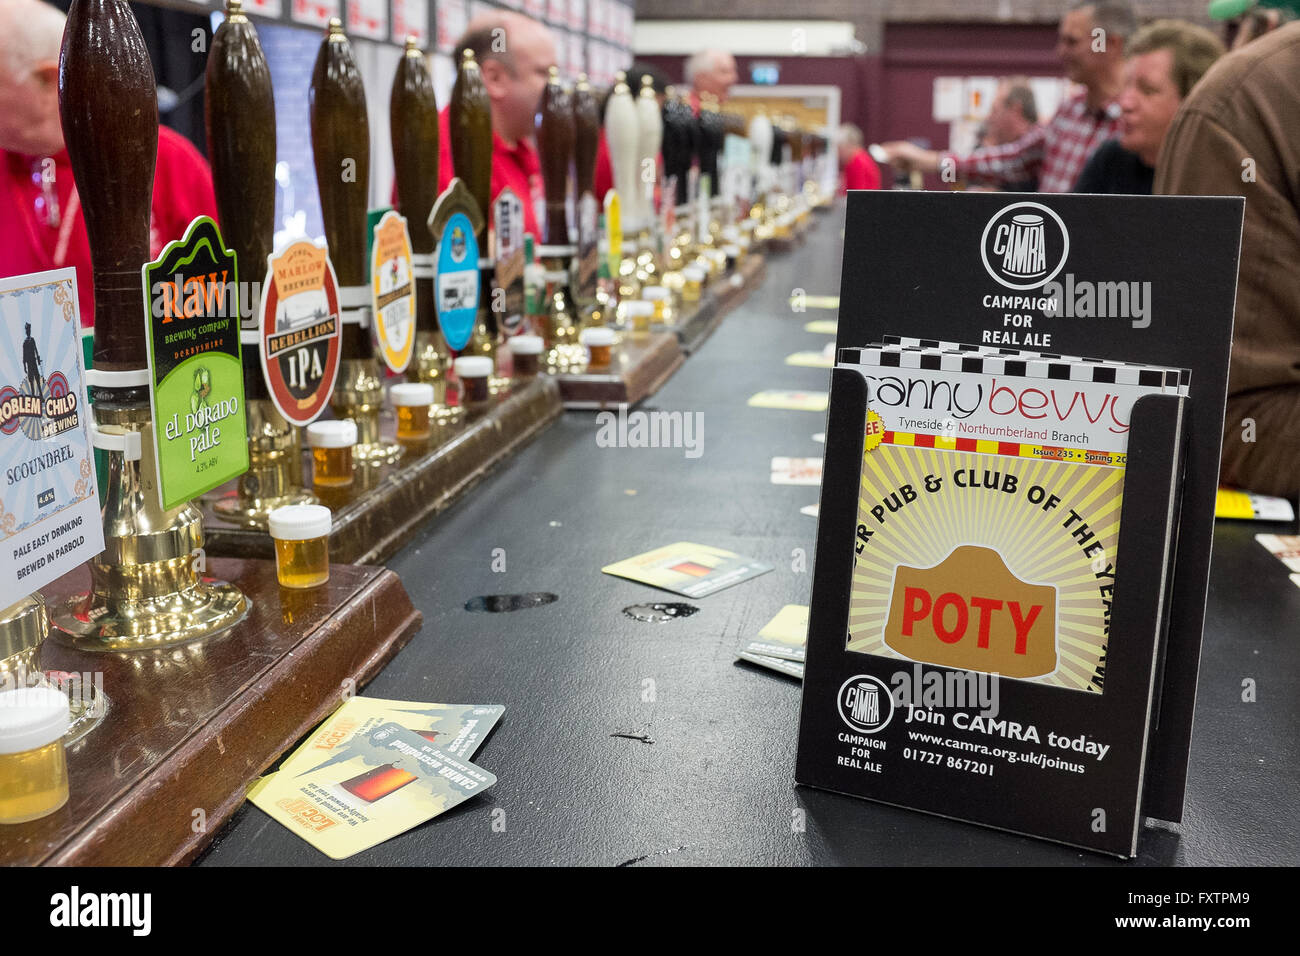 A CAMRA beer festival bar, local branch newsletter in the foreground Stock Photo